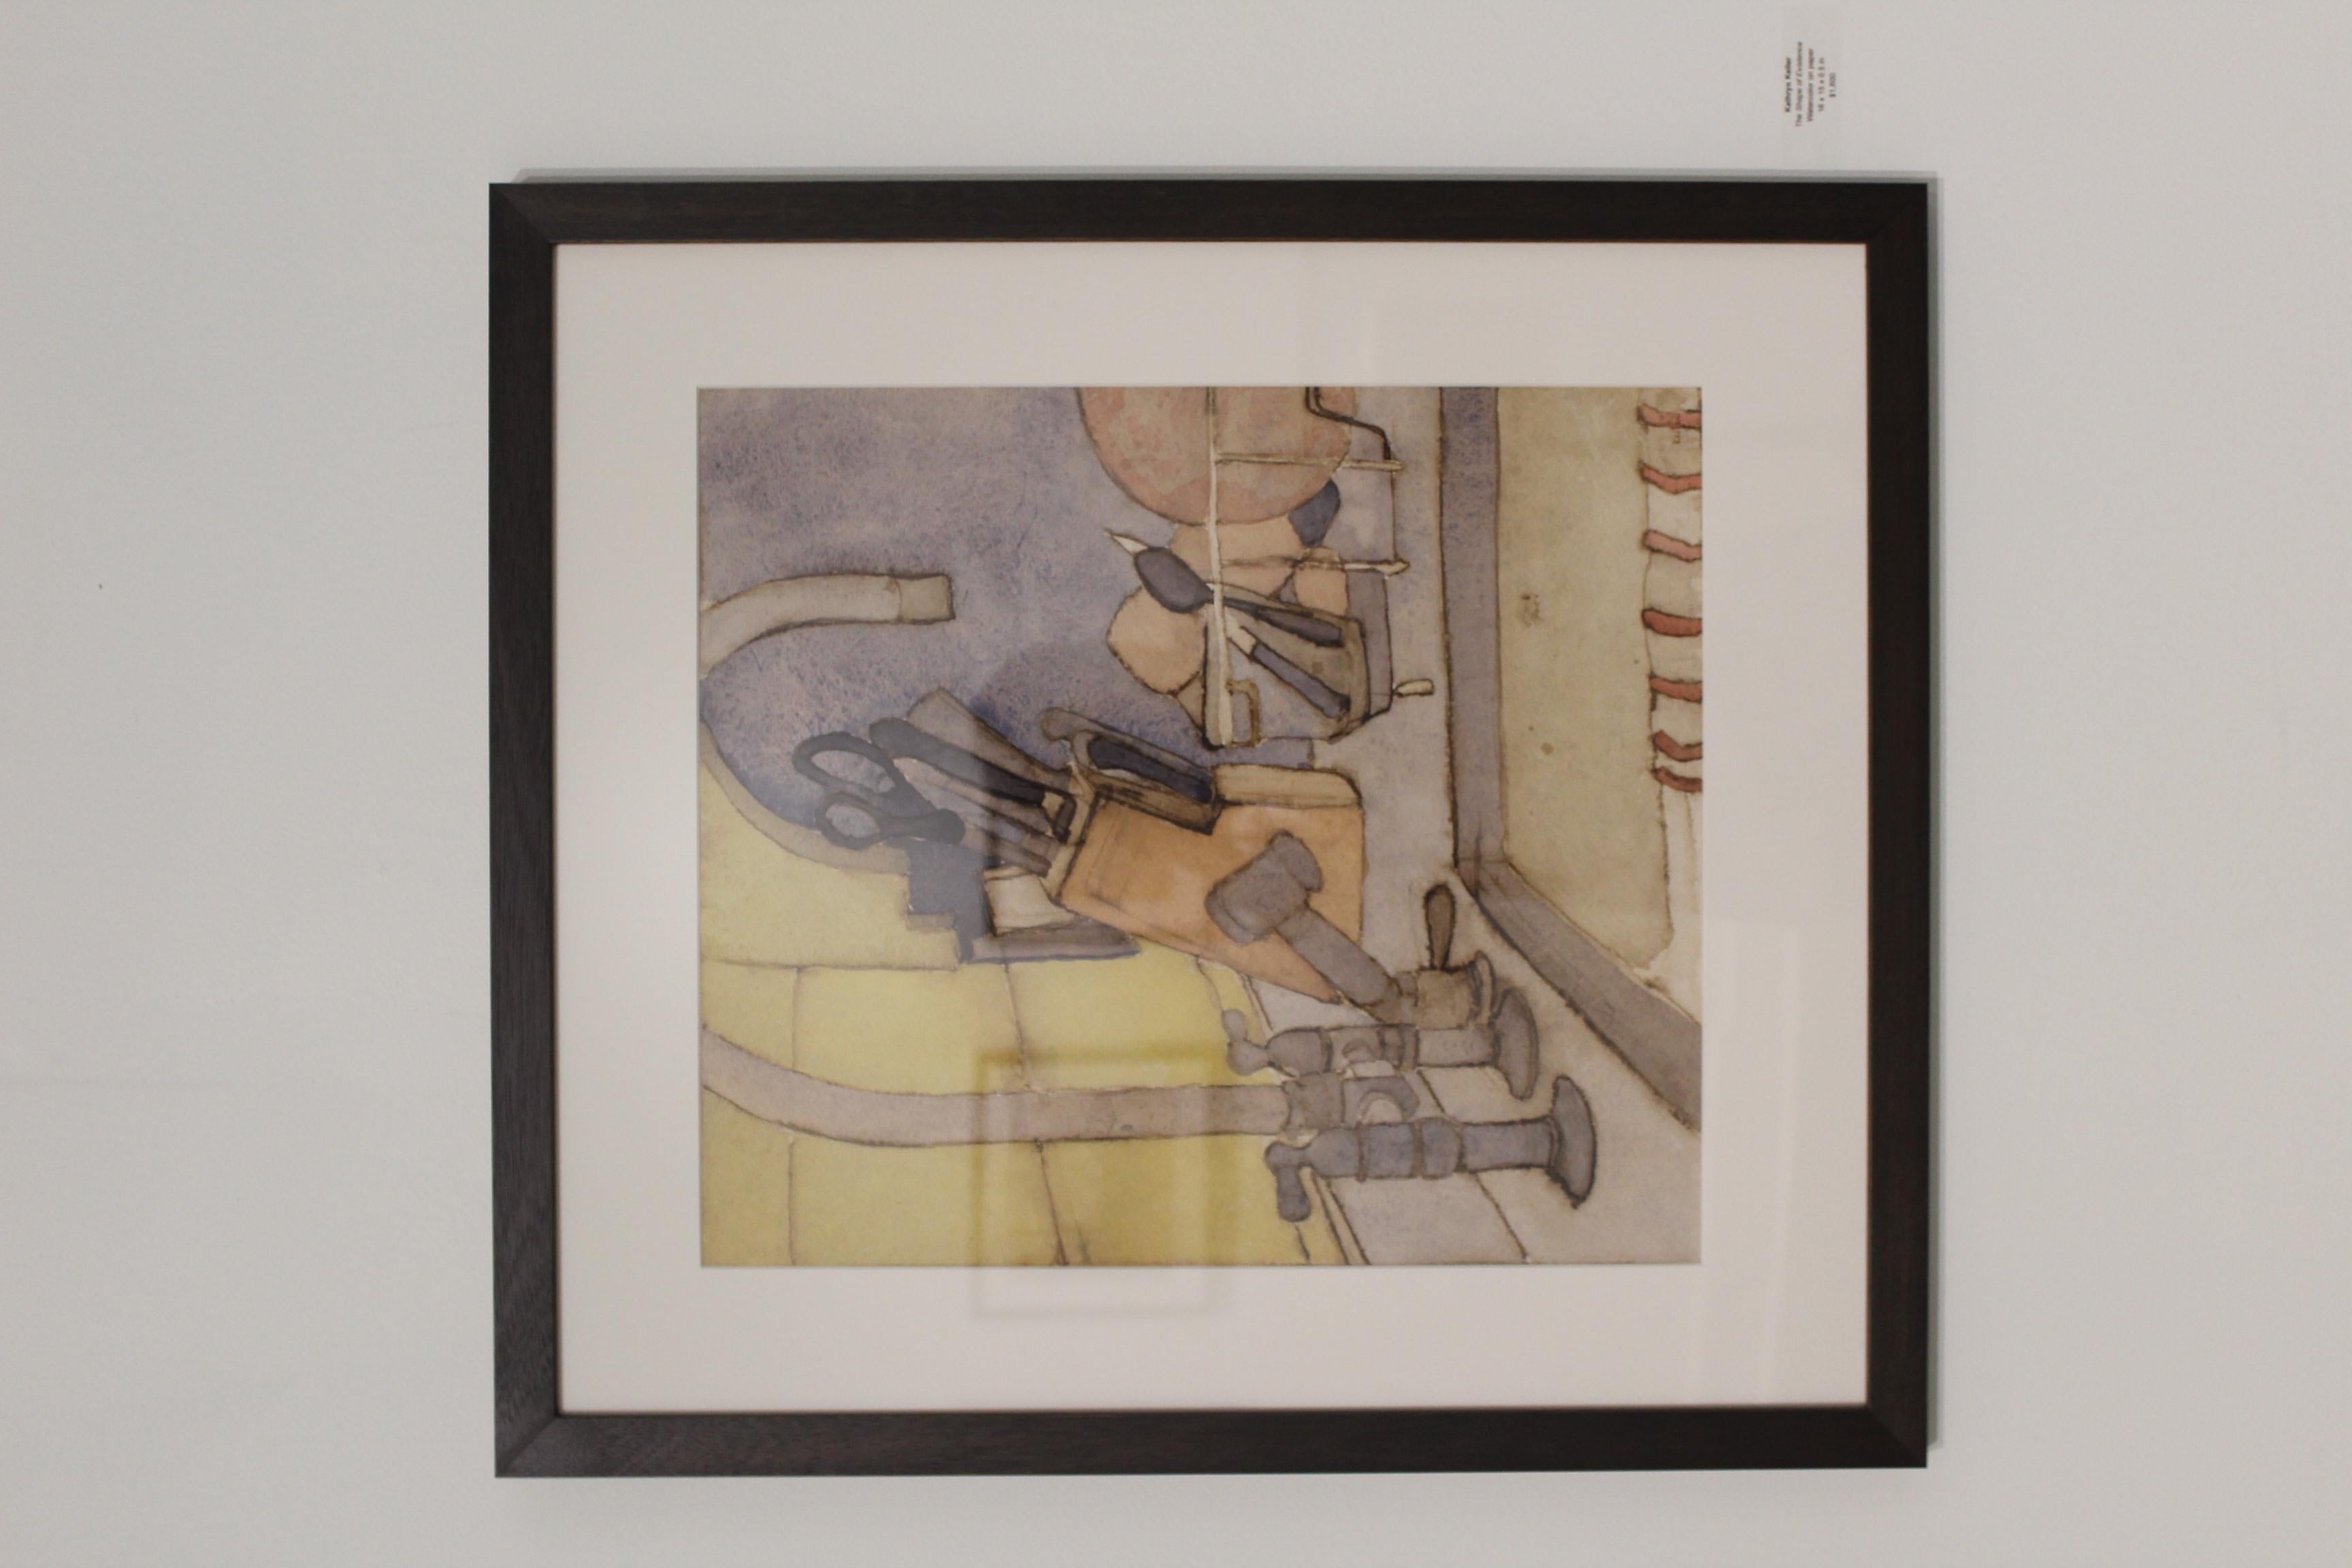 Kathryn Keller's watercolor depiction of an everyday domestic scene, the kitchen sink.